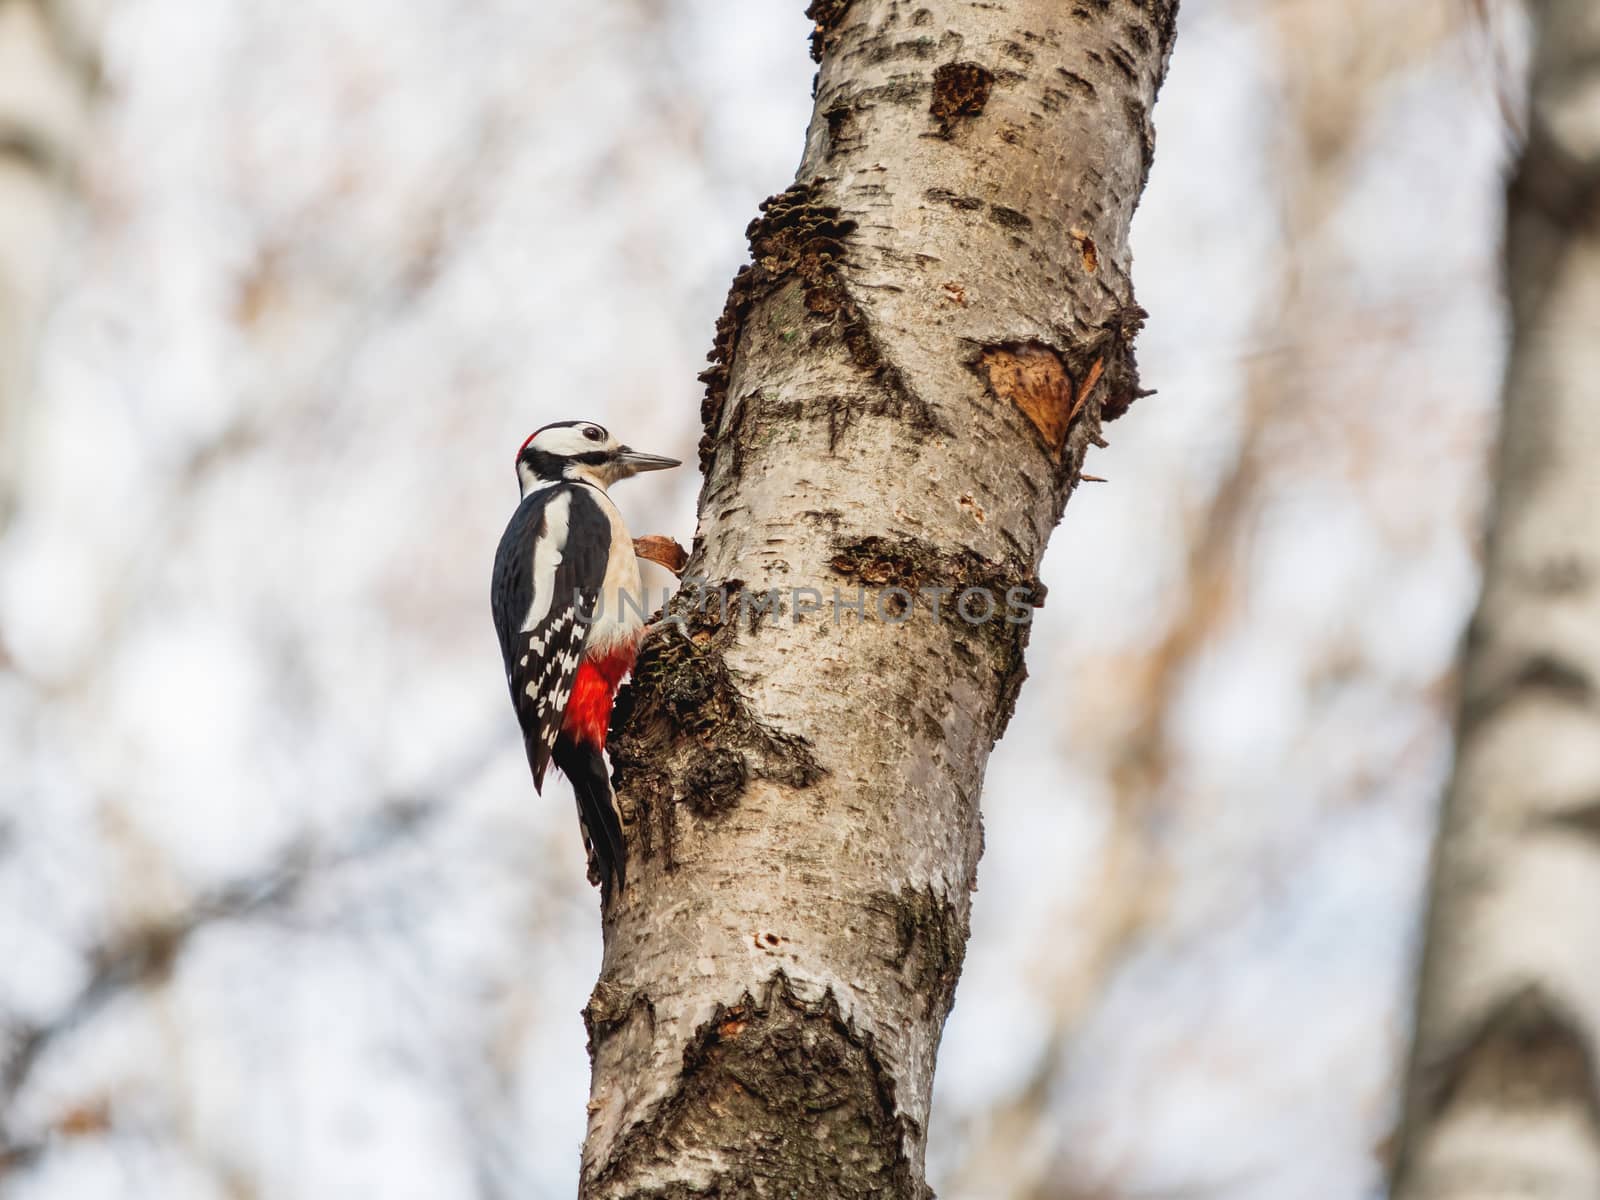 Great spotted woodpecker or Dendrocopos major. Bright bird on birch tree.